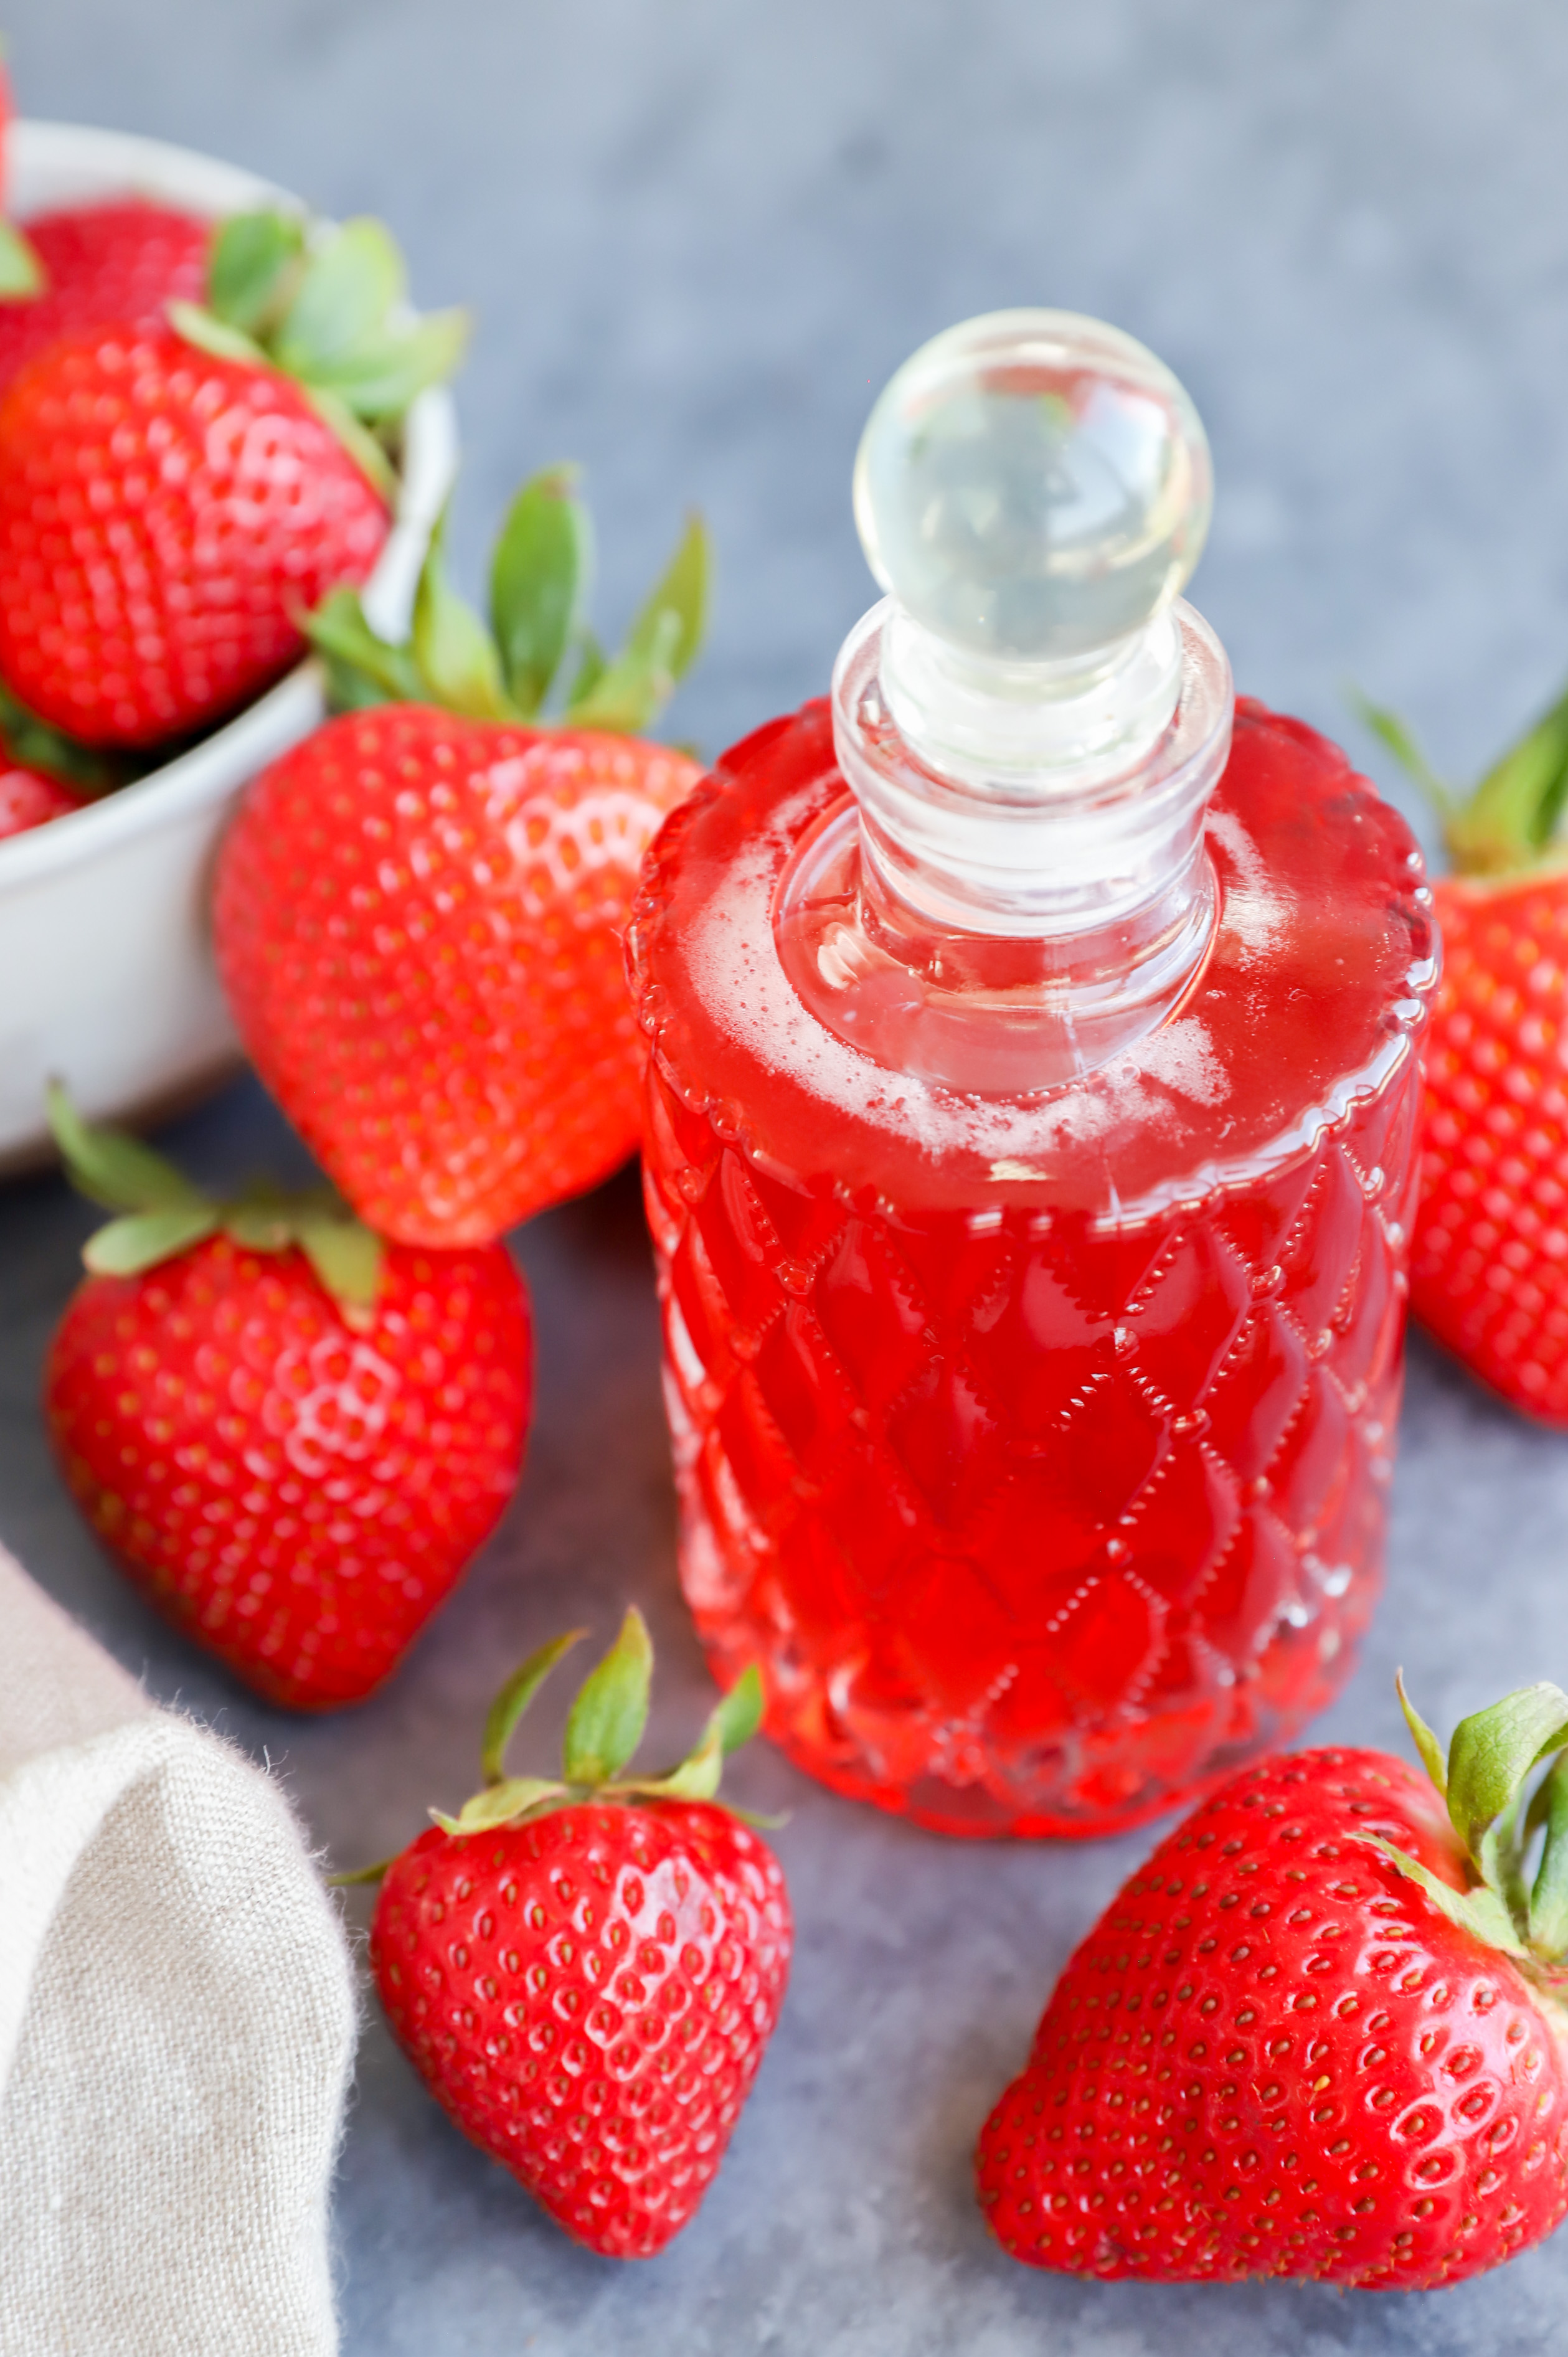 Image of strawberries and syrup in a jar with fruit